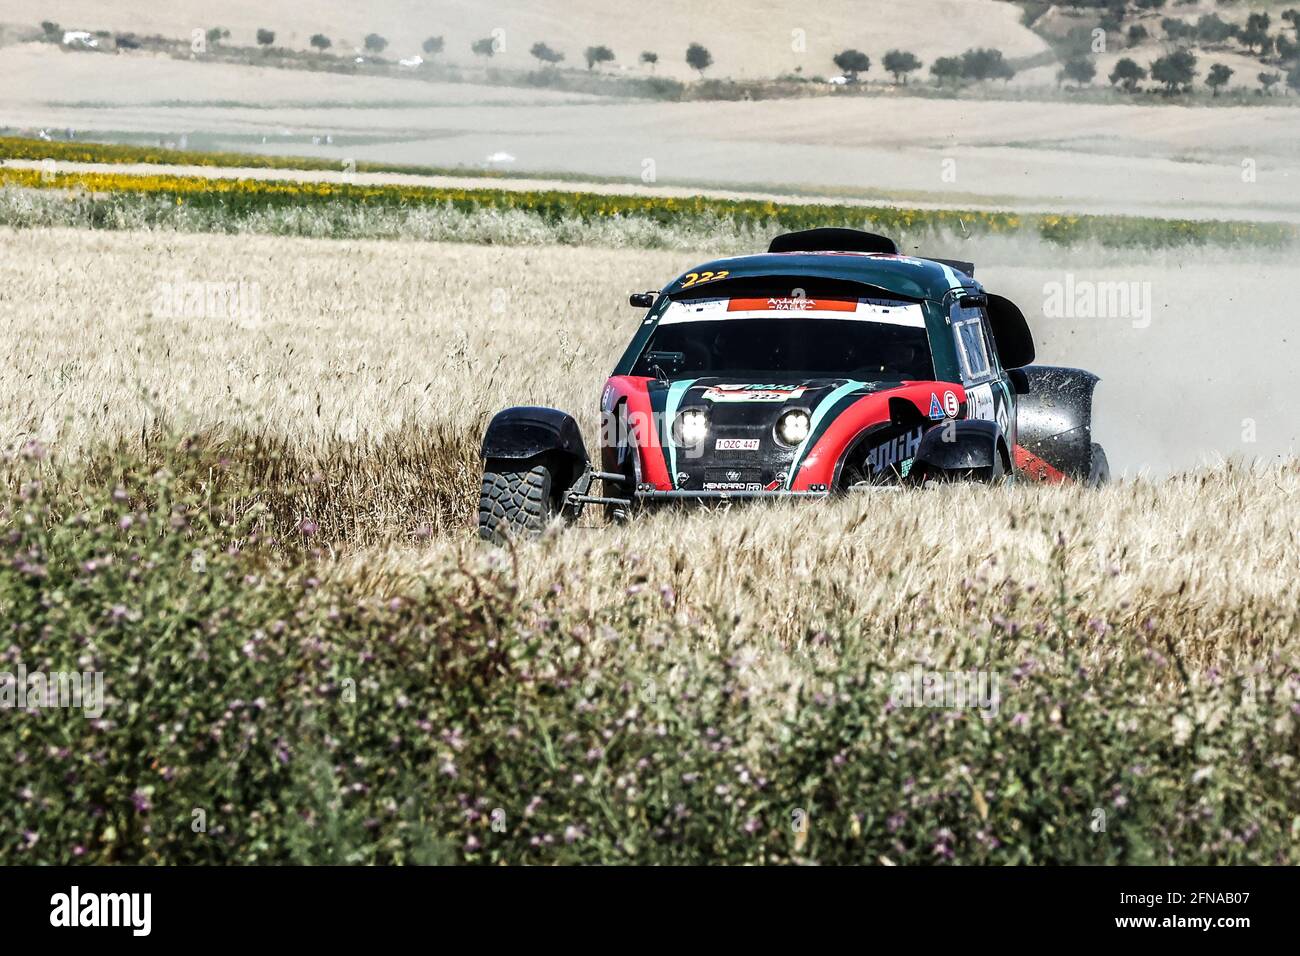 Seville, Spain. 15th May, 2021. Gregoire D Mevius in action during the stage of the Andalucia Rally 2021 rally route, a preparation test for the Rally Dakar 2022, in Viso del Alcor, Seville, Spain, 15 May 2021. Credit: Jose Luis Contreras/DAX/ZUMA Wire/Alamy Live News Stock Photo